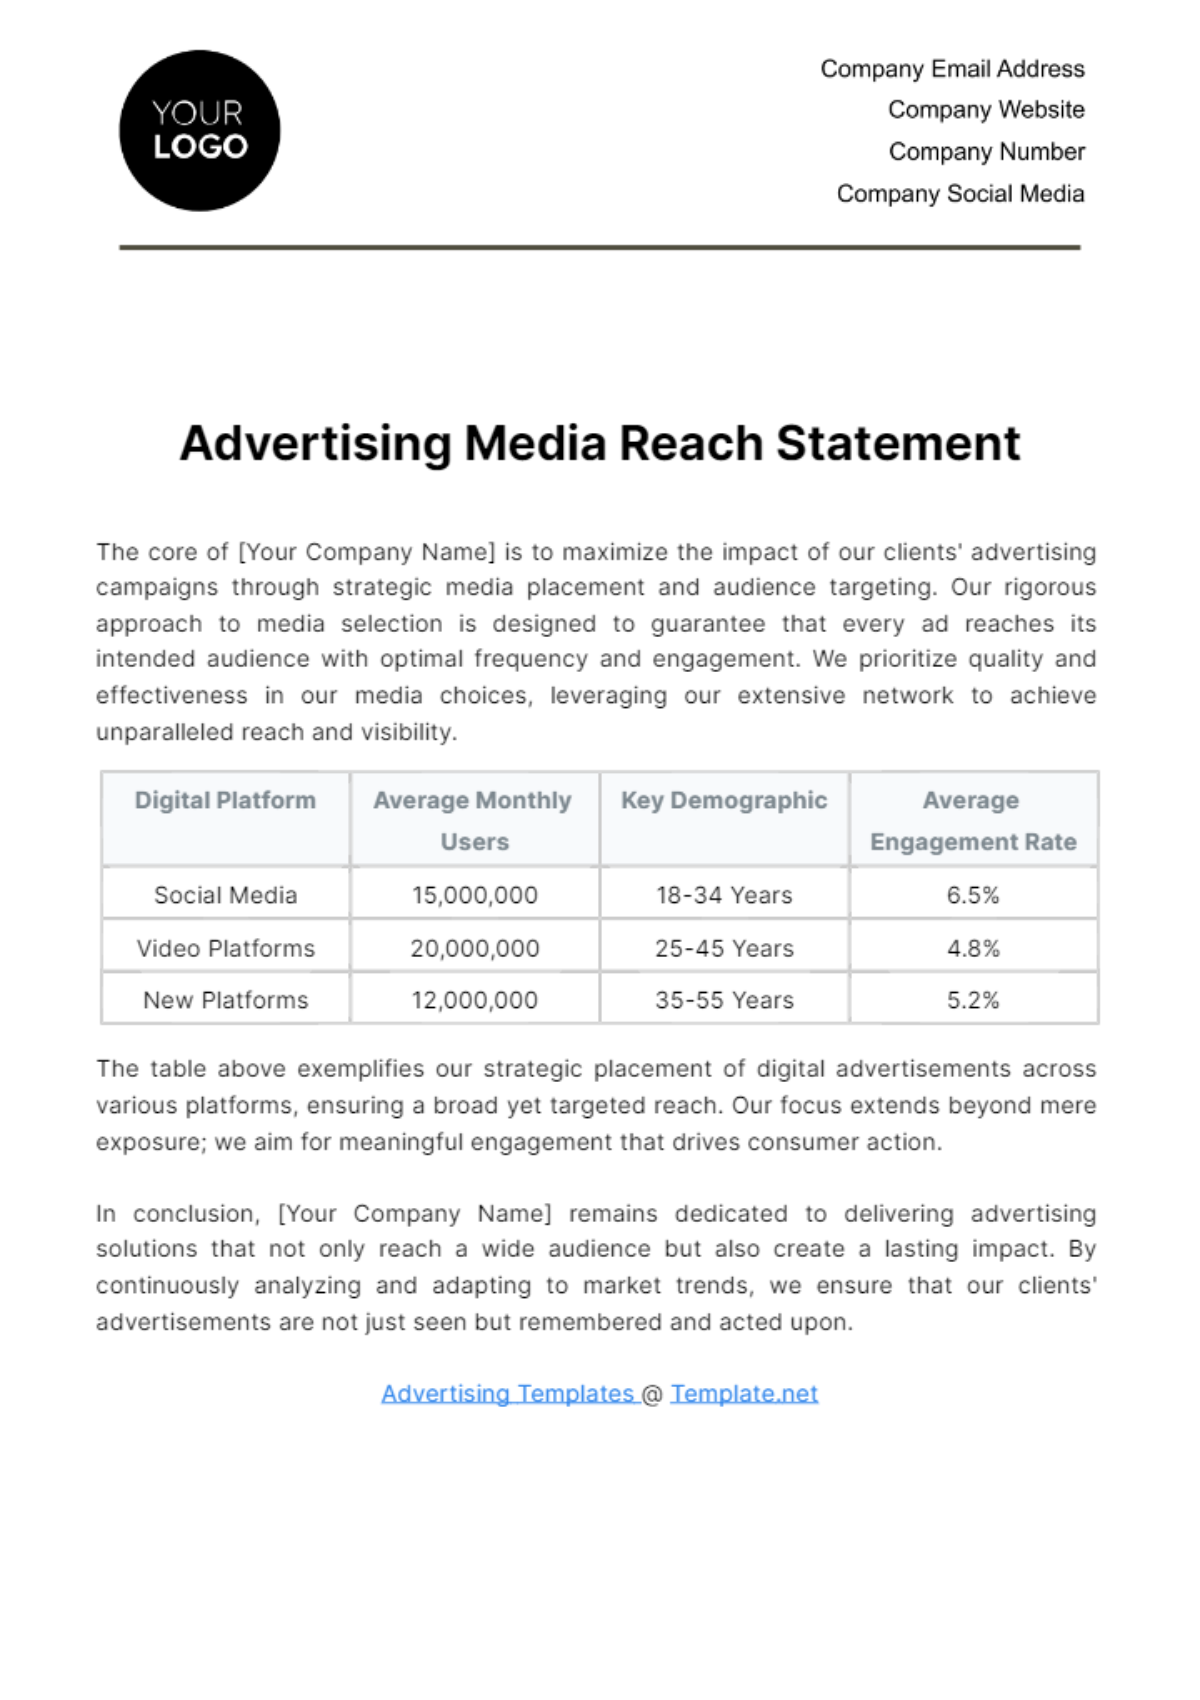 Free Advertising Media Reach Statement Template